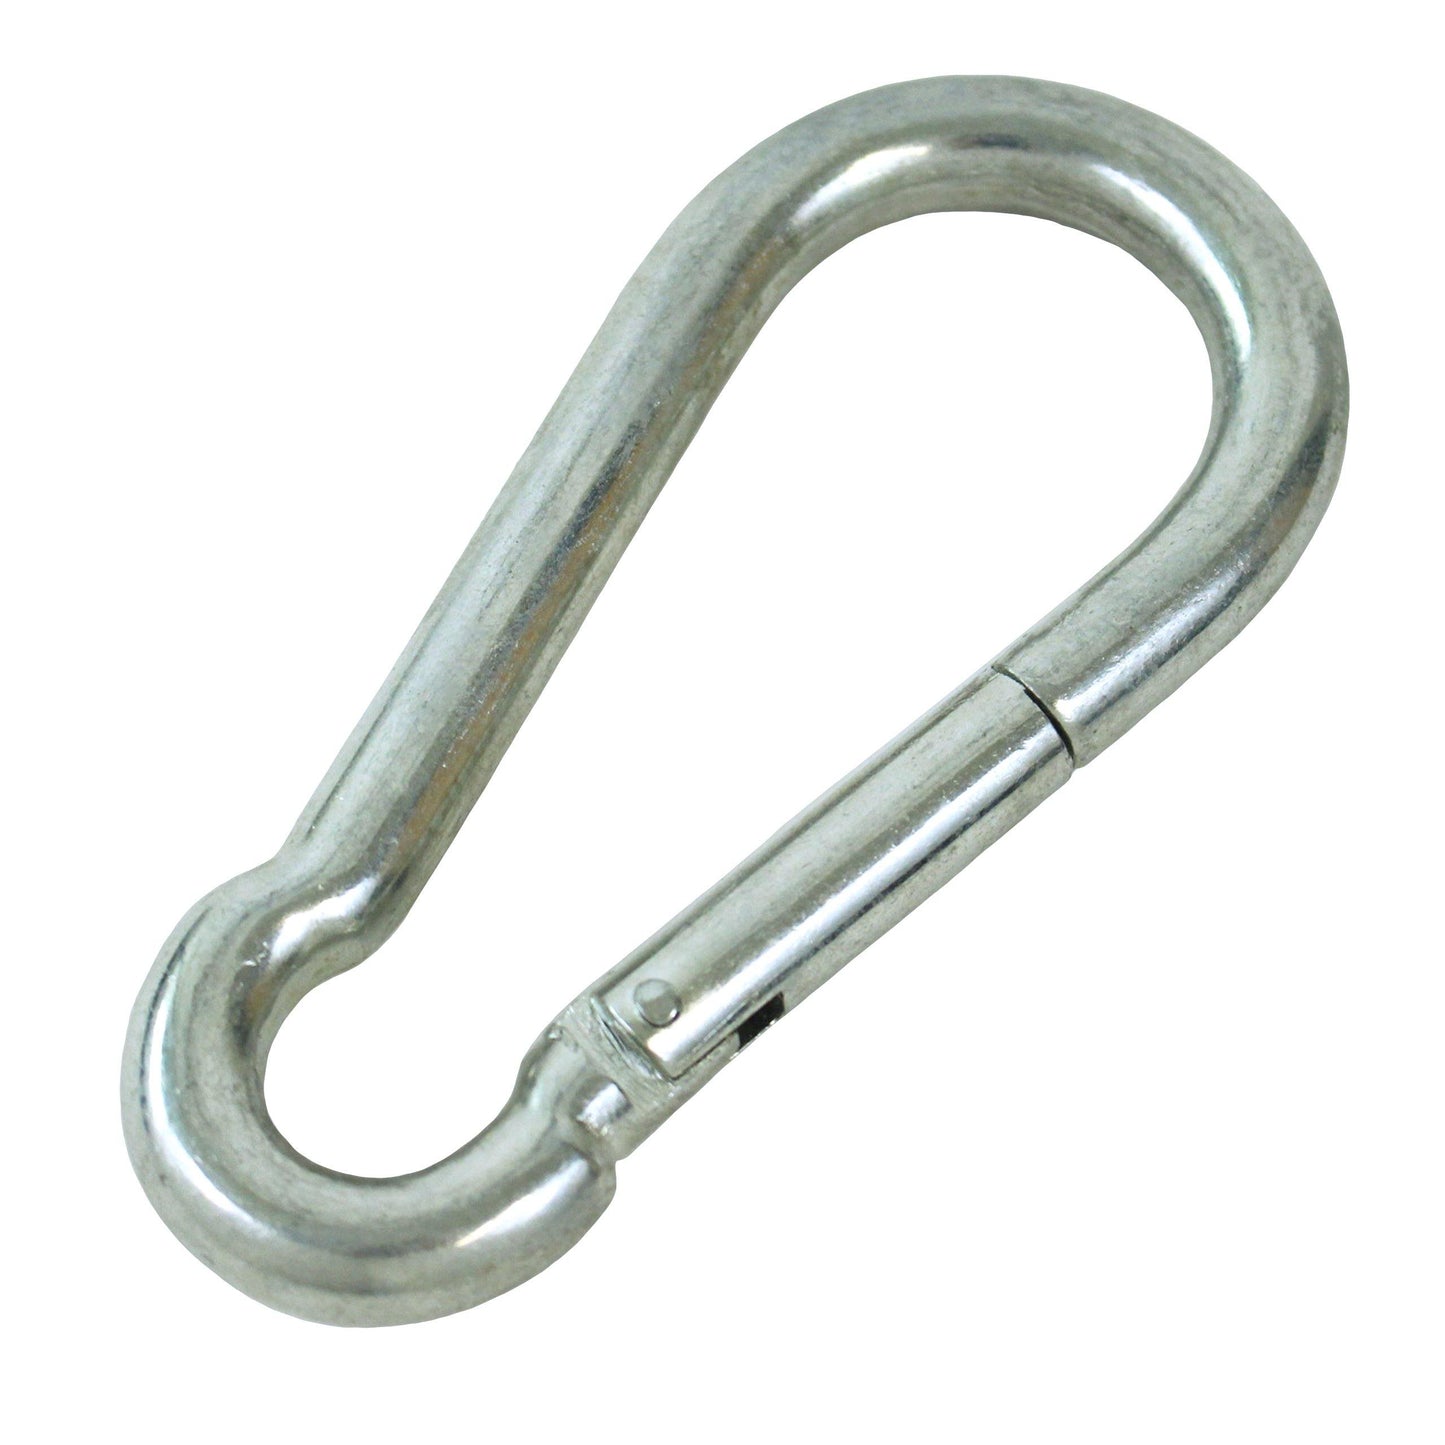 Snap Hook Carabiners - 10 Pieces - Boxer Tools